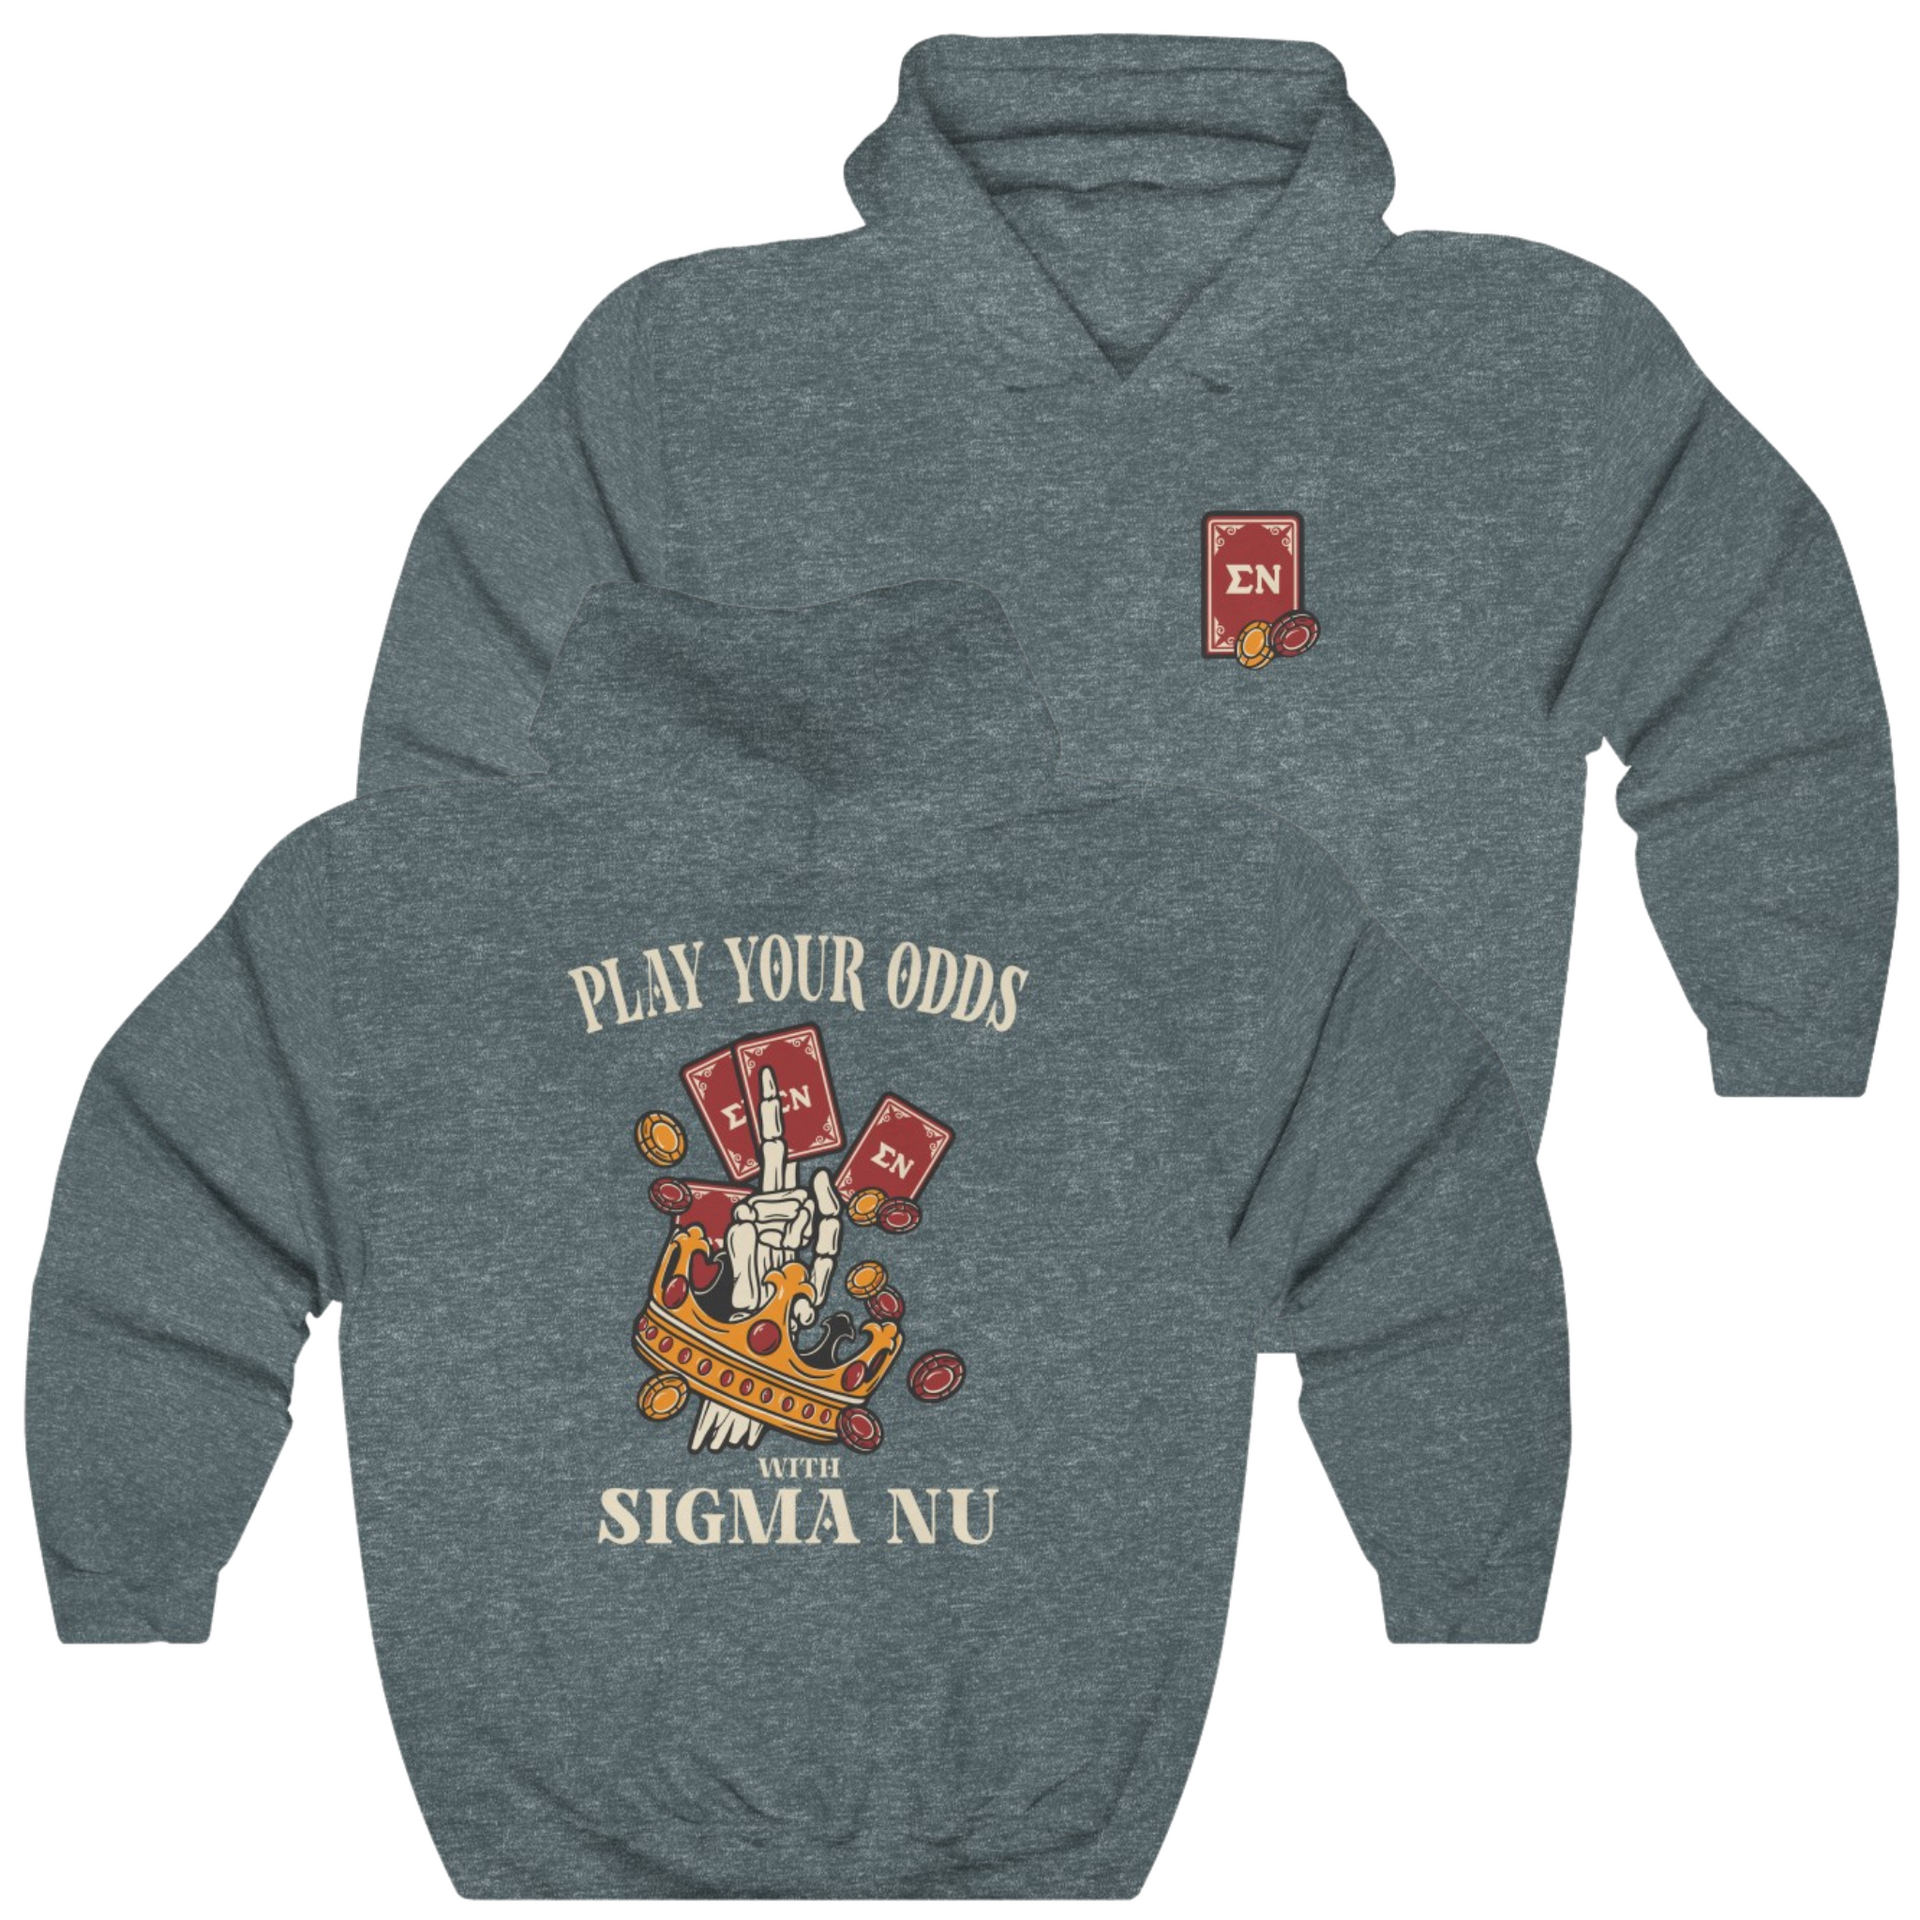 grey Sigma Nu Graphic Hoodie | Play Your Odds | Sigma Nu Clothing, Apparel and Merchandise